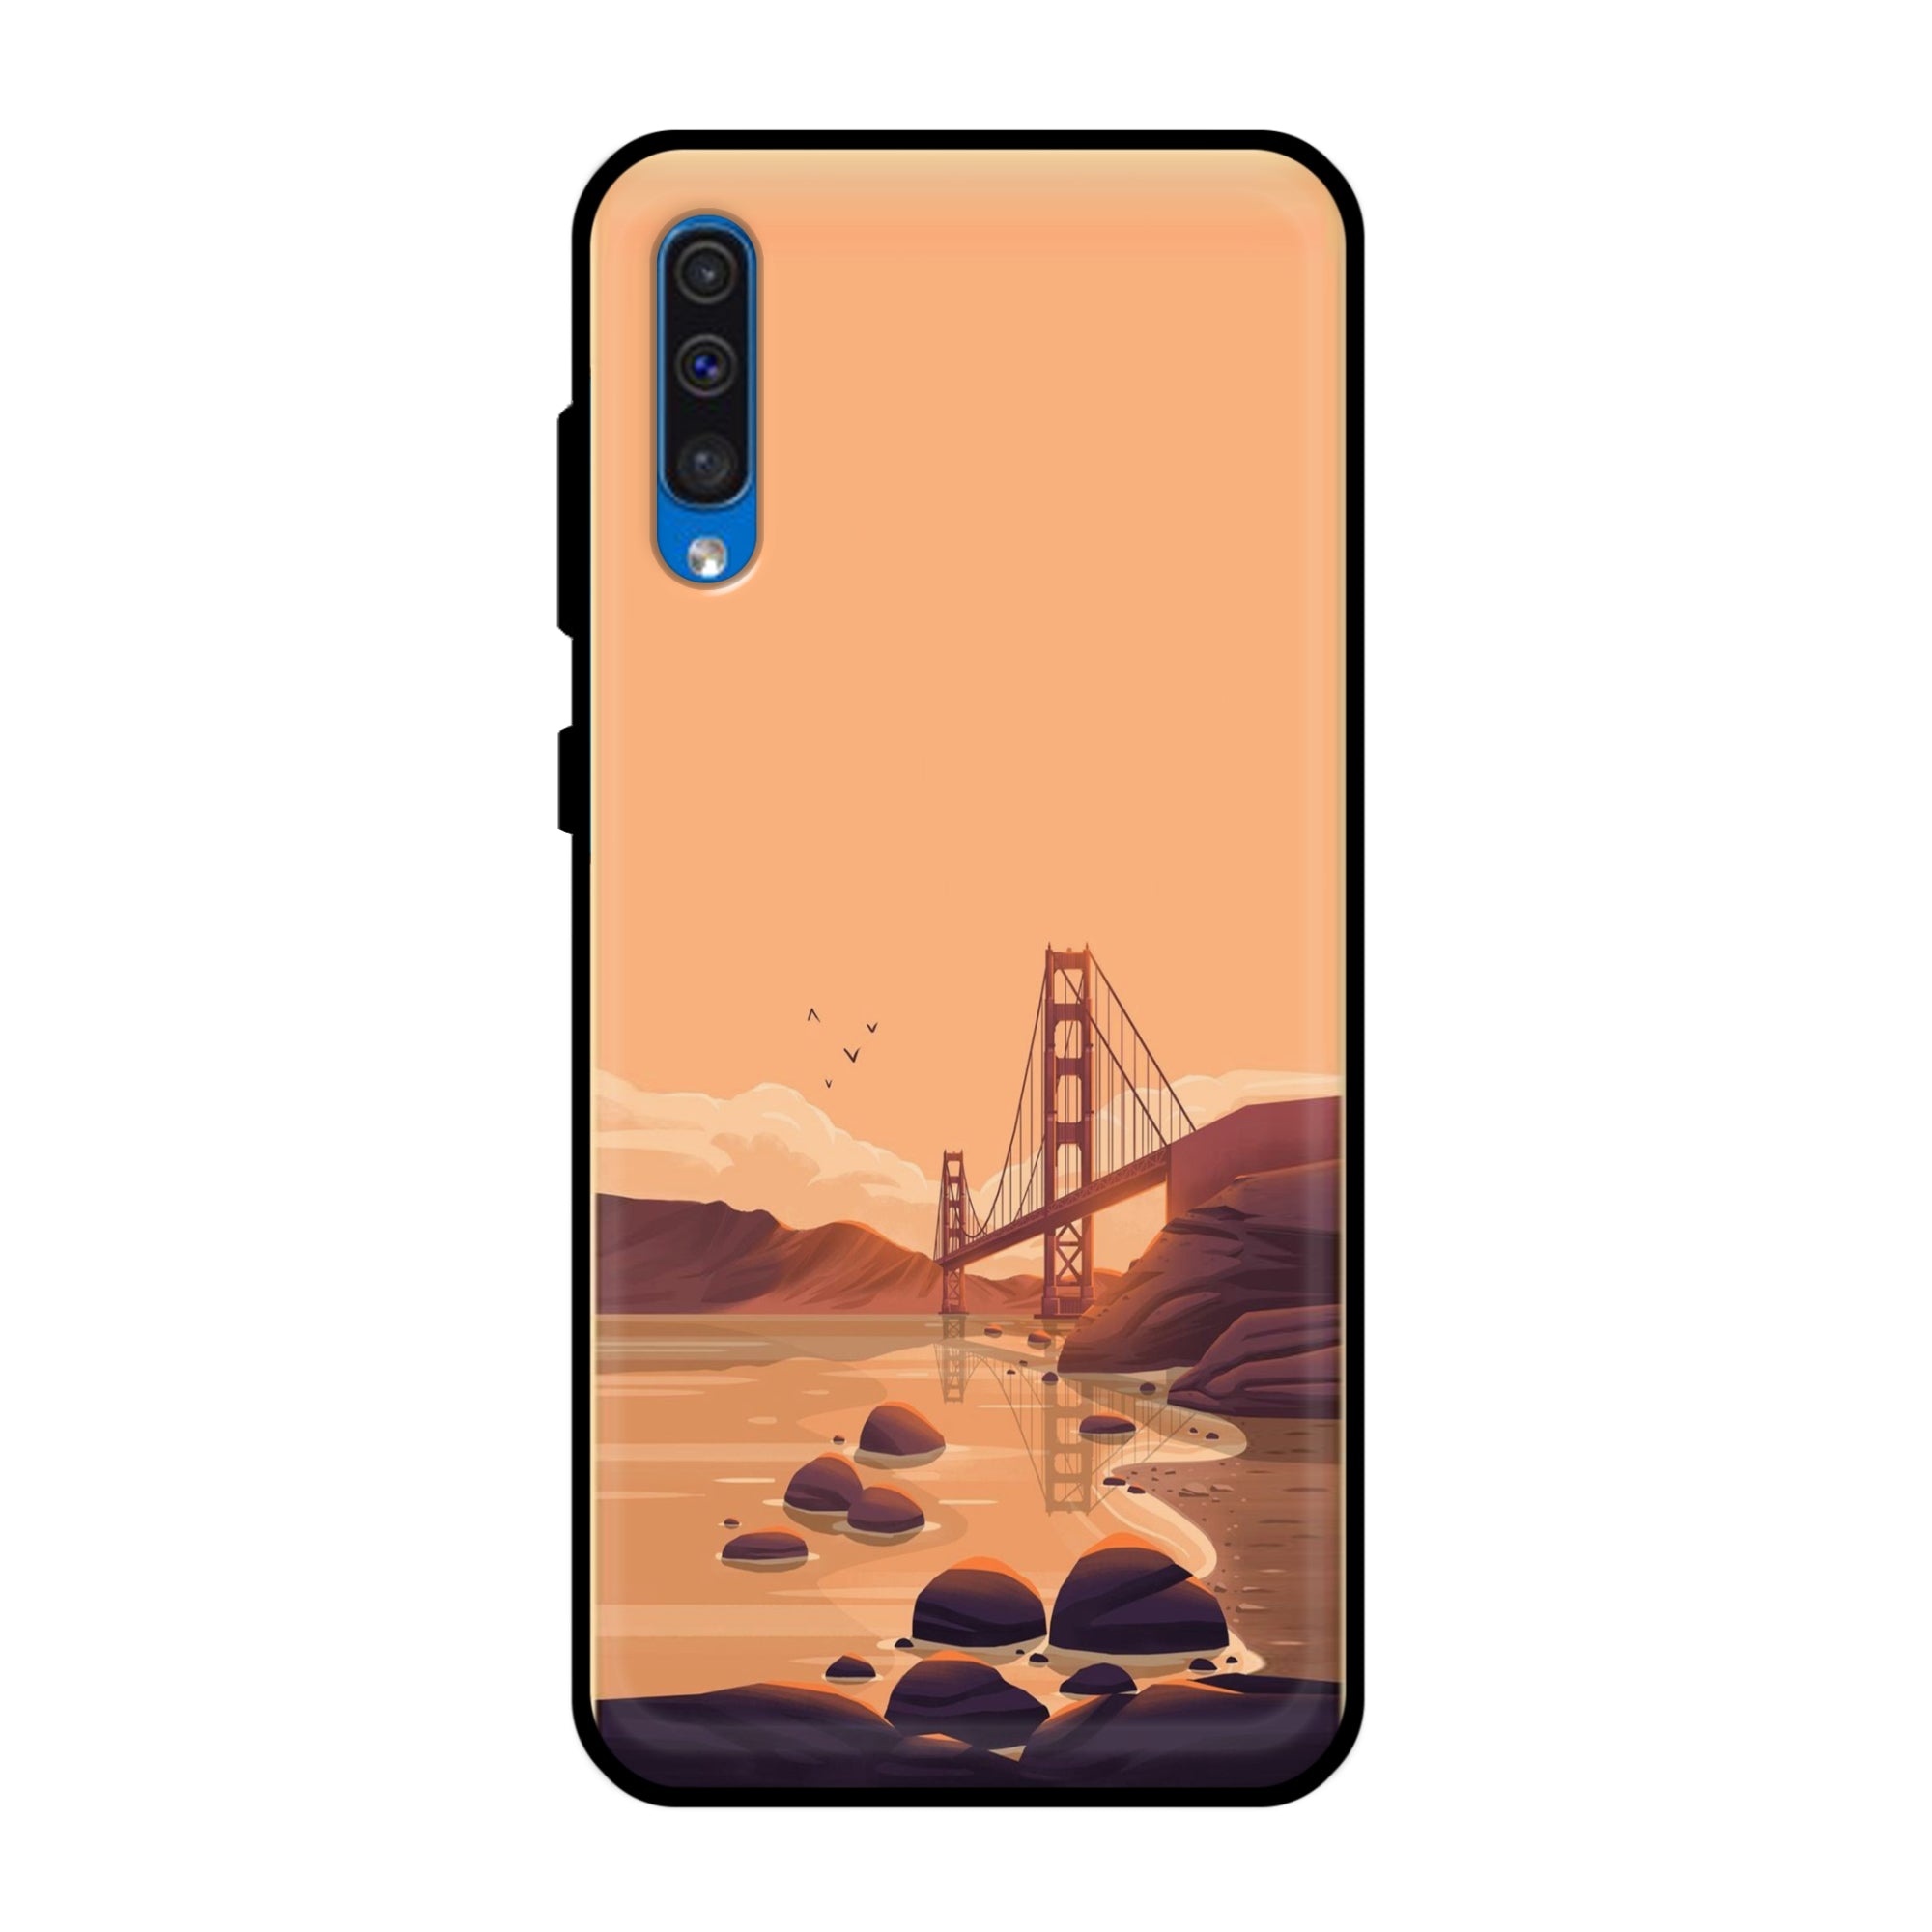 Buy San Francisco Metal-Silicon Back Mobile Phone Case/Cover For Samsung Galaxy A50 / A50s / A30s Online